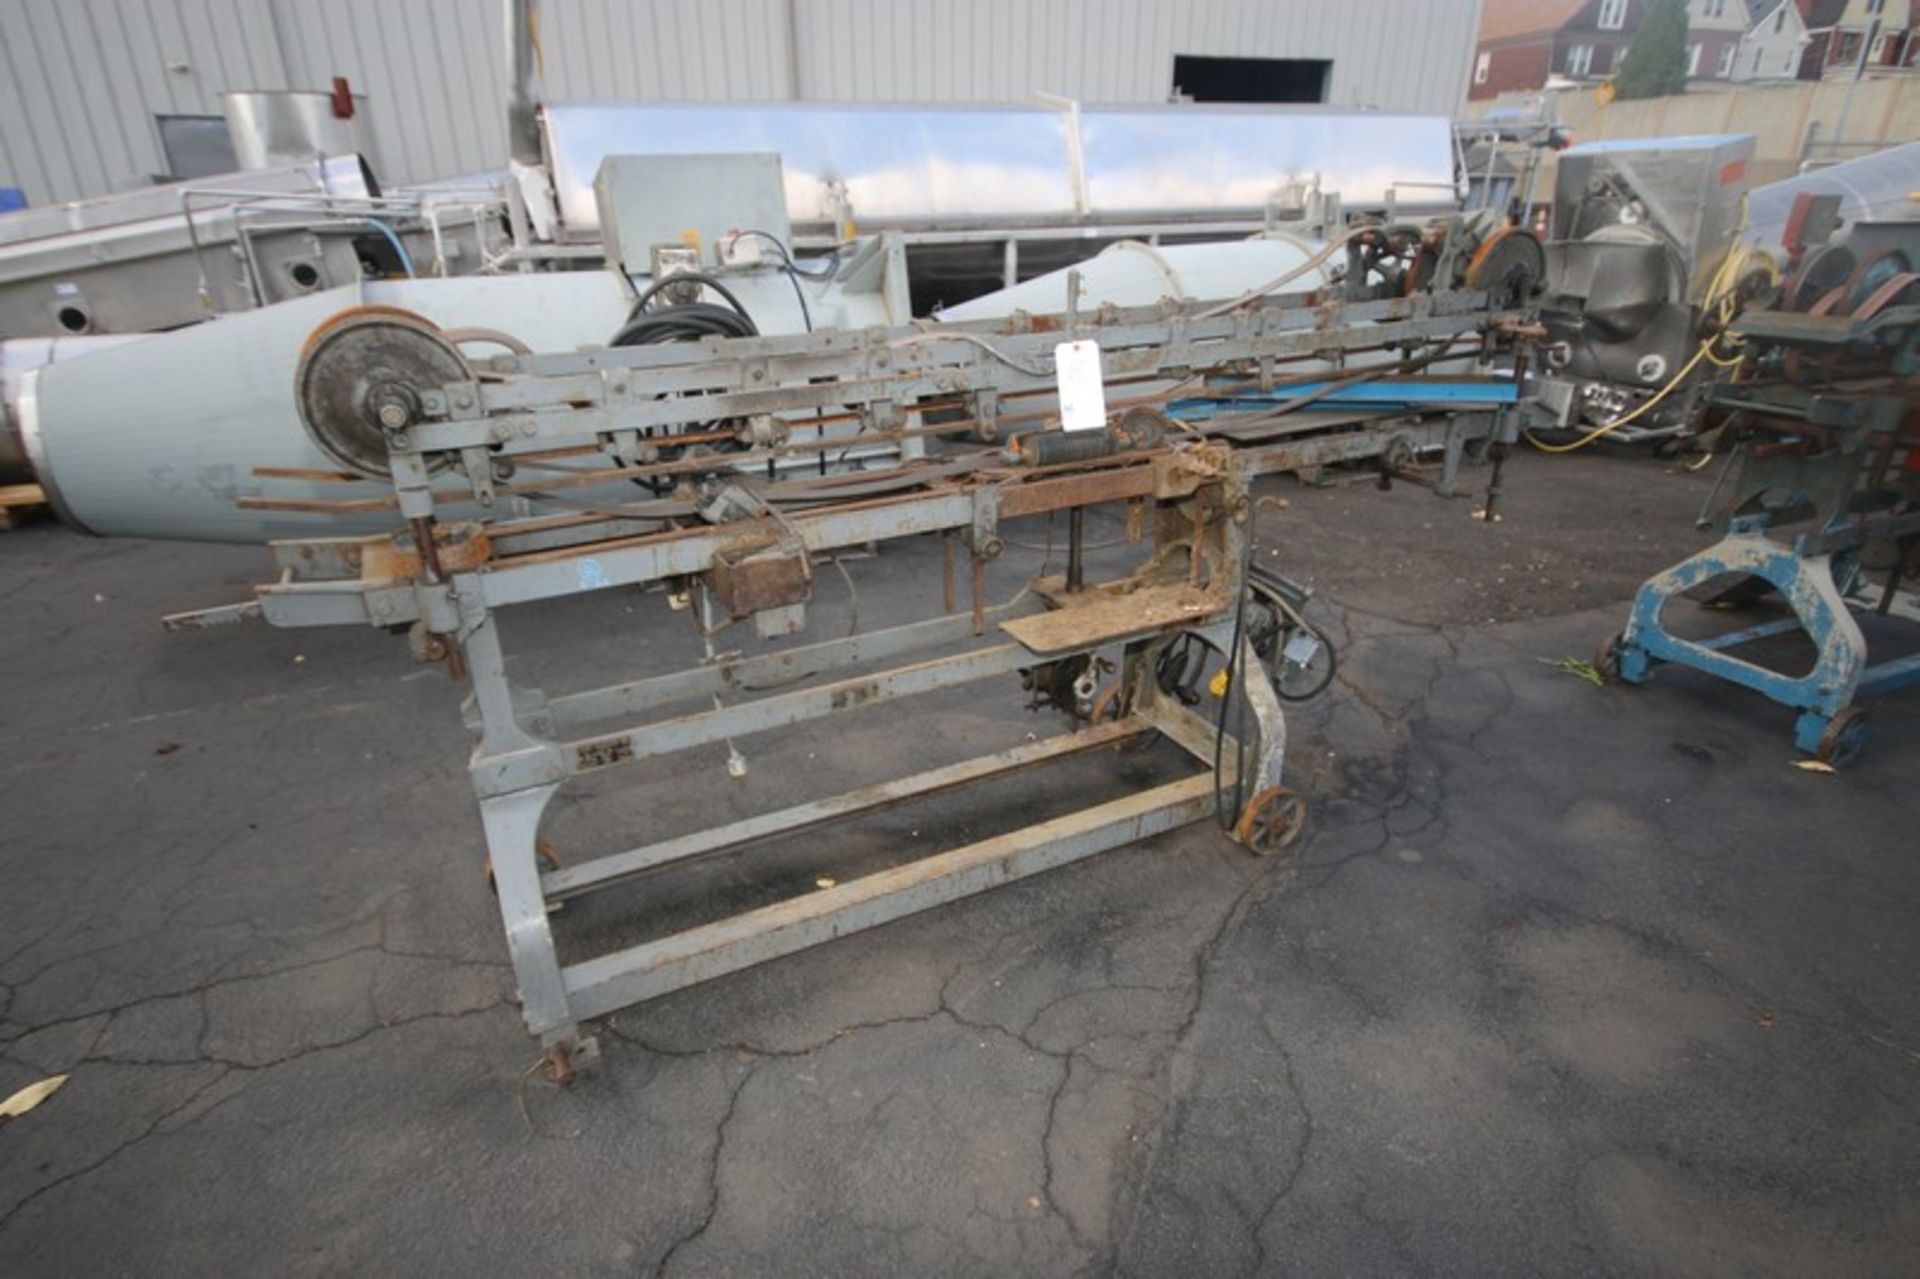 Burt Roll Through Labeling Machine, S/N 13005 Possibly Missing Parts (INV#73222) (LOCATED AT MDG - Image 2 of 6